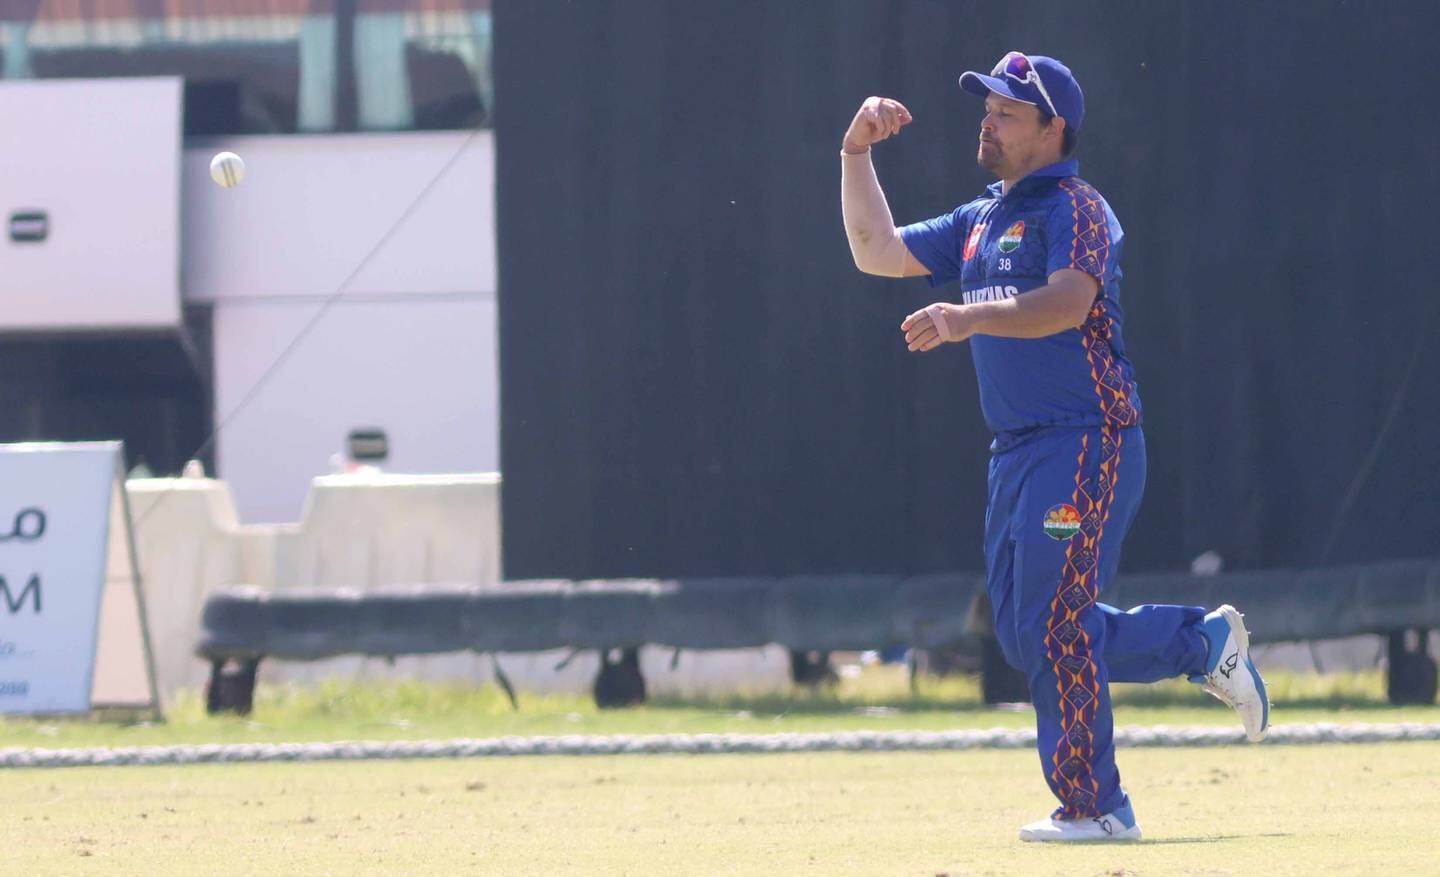 Richard Goodwin has opened the batting and the bowling for the Philippines at the ICC World T20 Global Qualifier. Photo: Subas Humagain